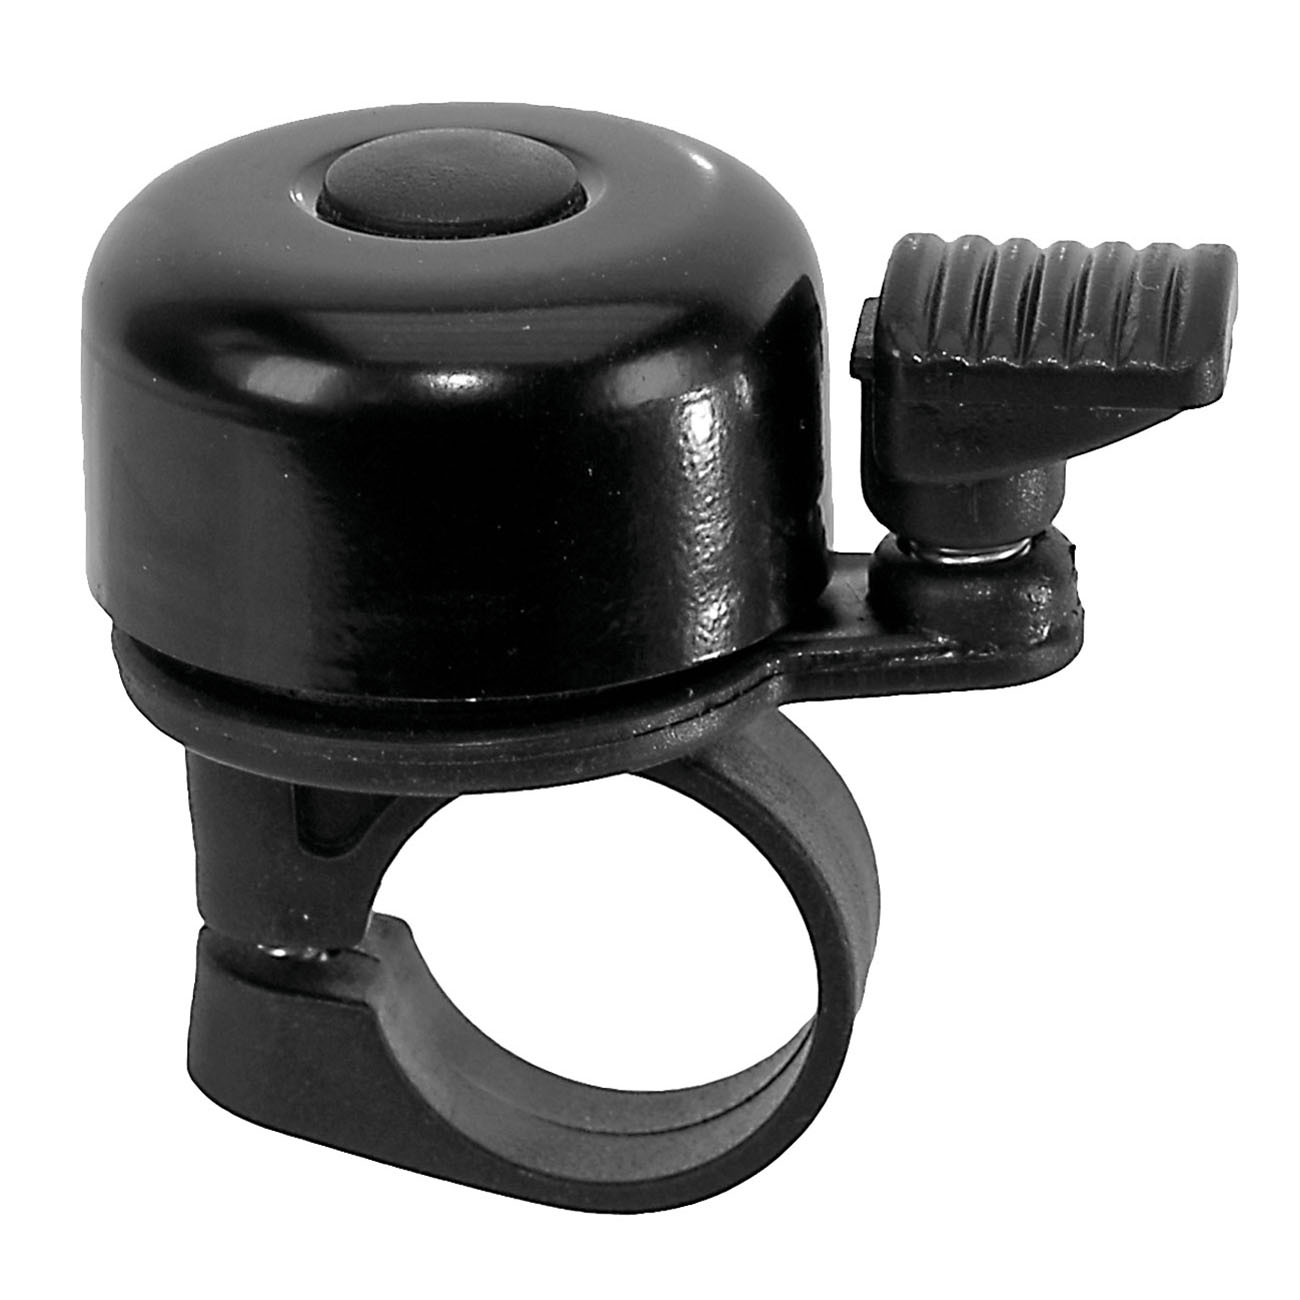 Alu mini bicycle bell – AVAILABLE IN SELECTED BIKE SHOPS